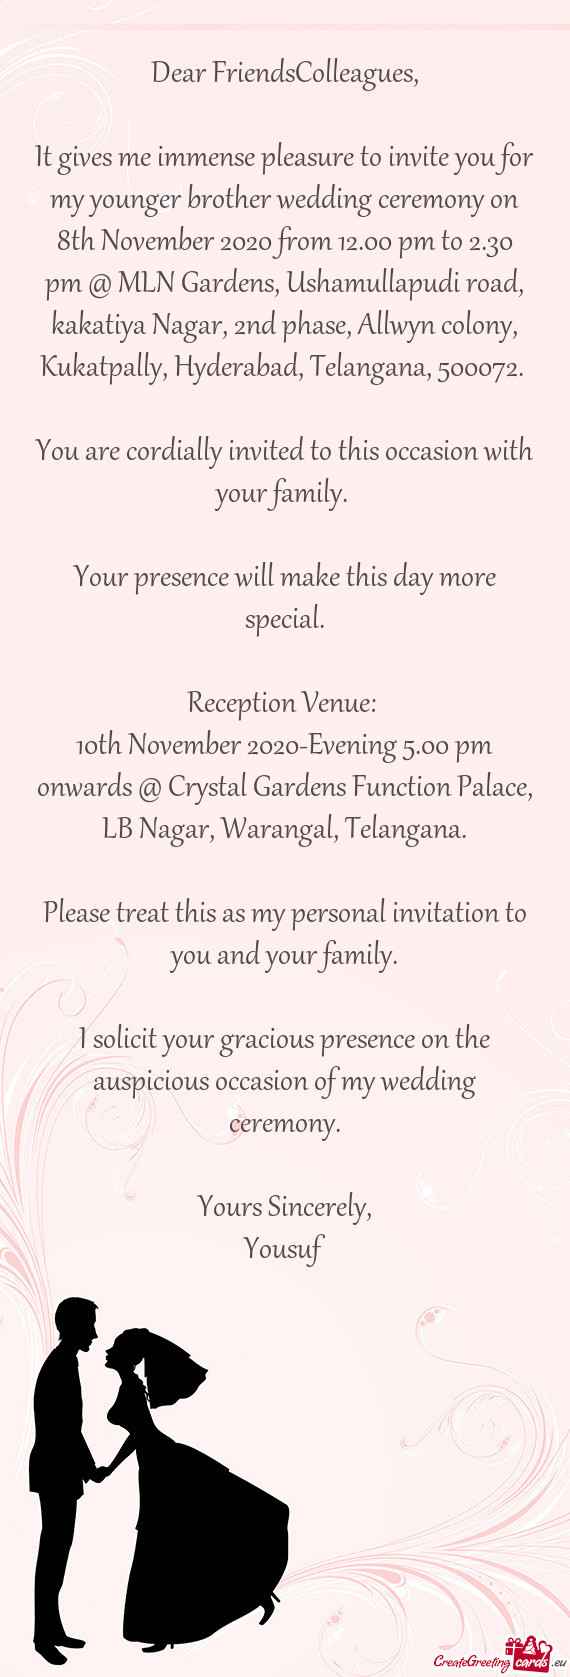 It gives me immense pleasure to invite you for my younger brother wedding ceremony on 8th November 2